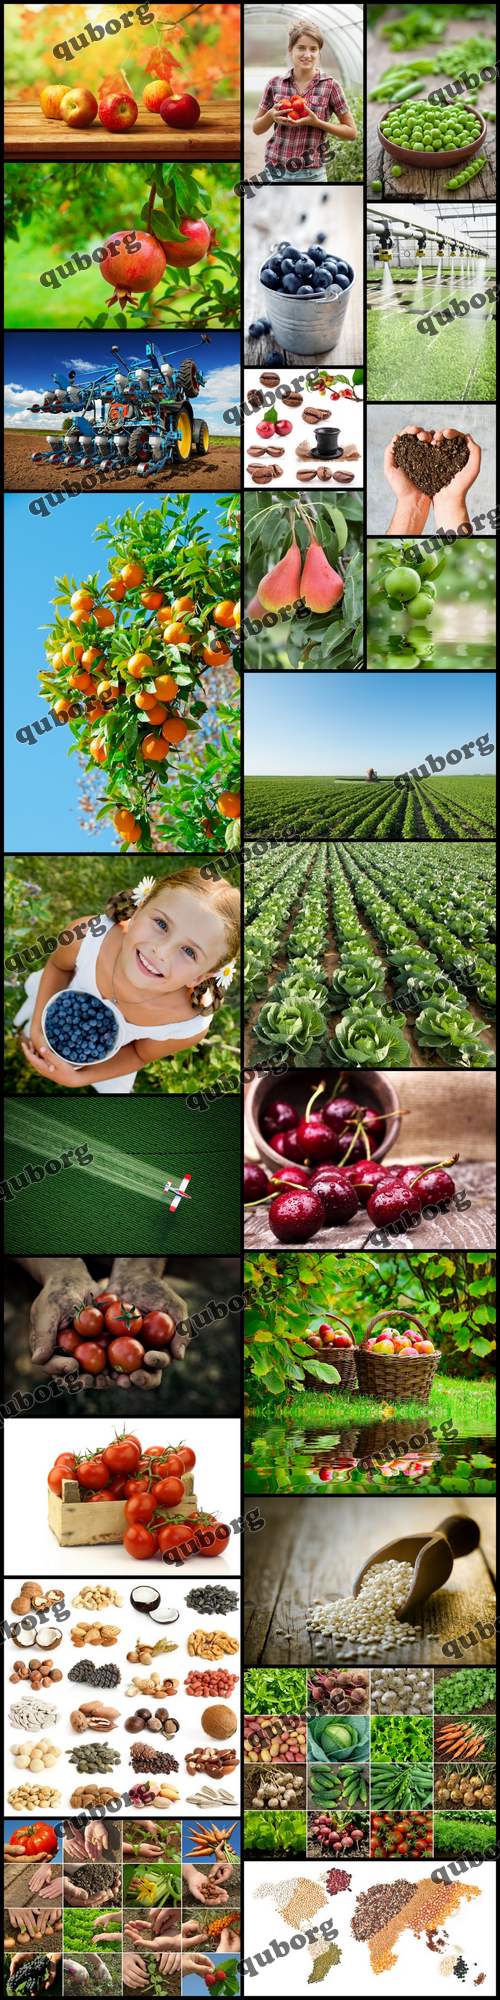 Stock Photos - Agriculture 3